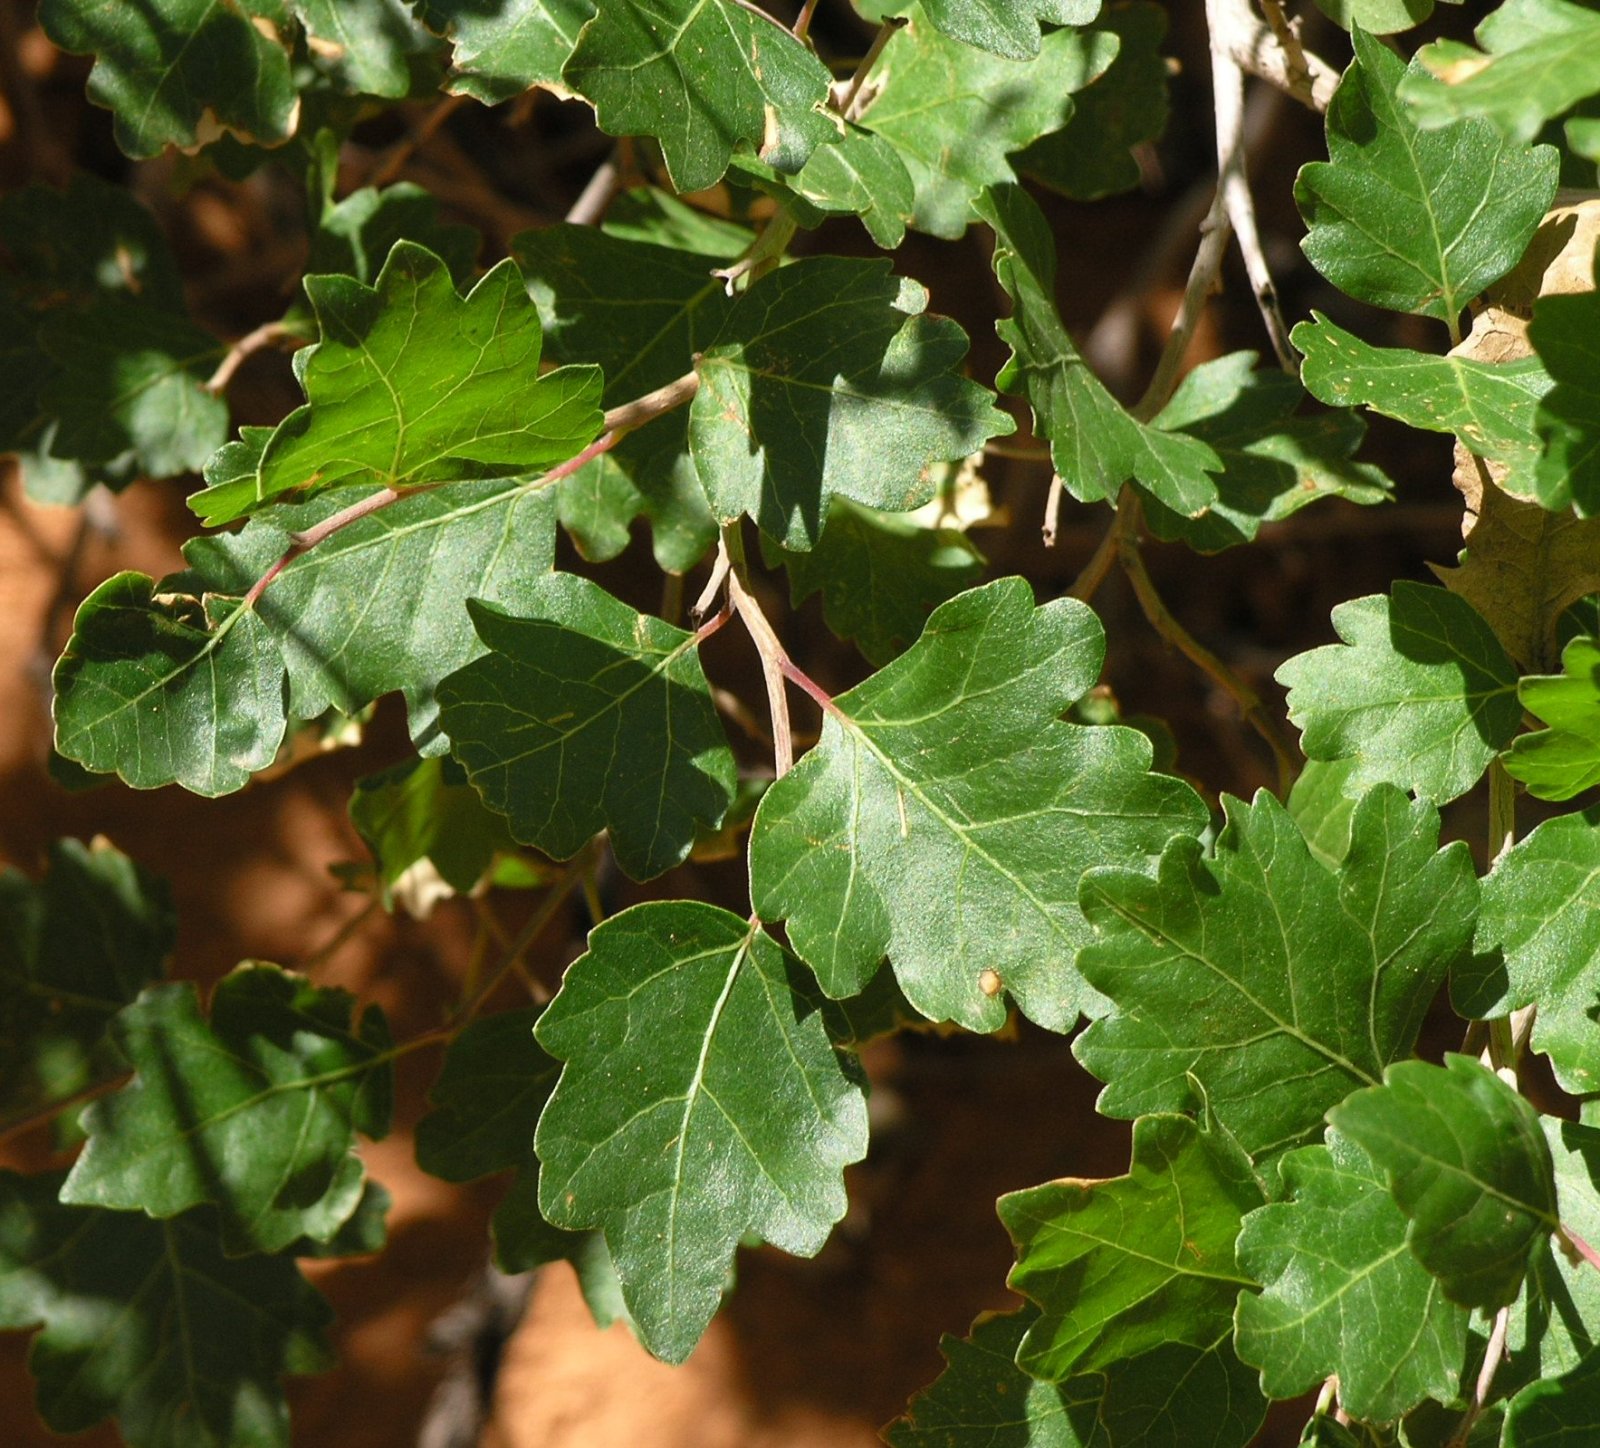 File:Leaves of another bush in Arches NP.jpeg - Wikimedia Commons